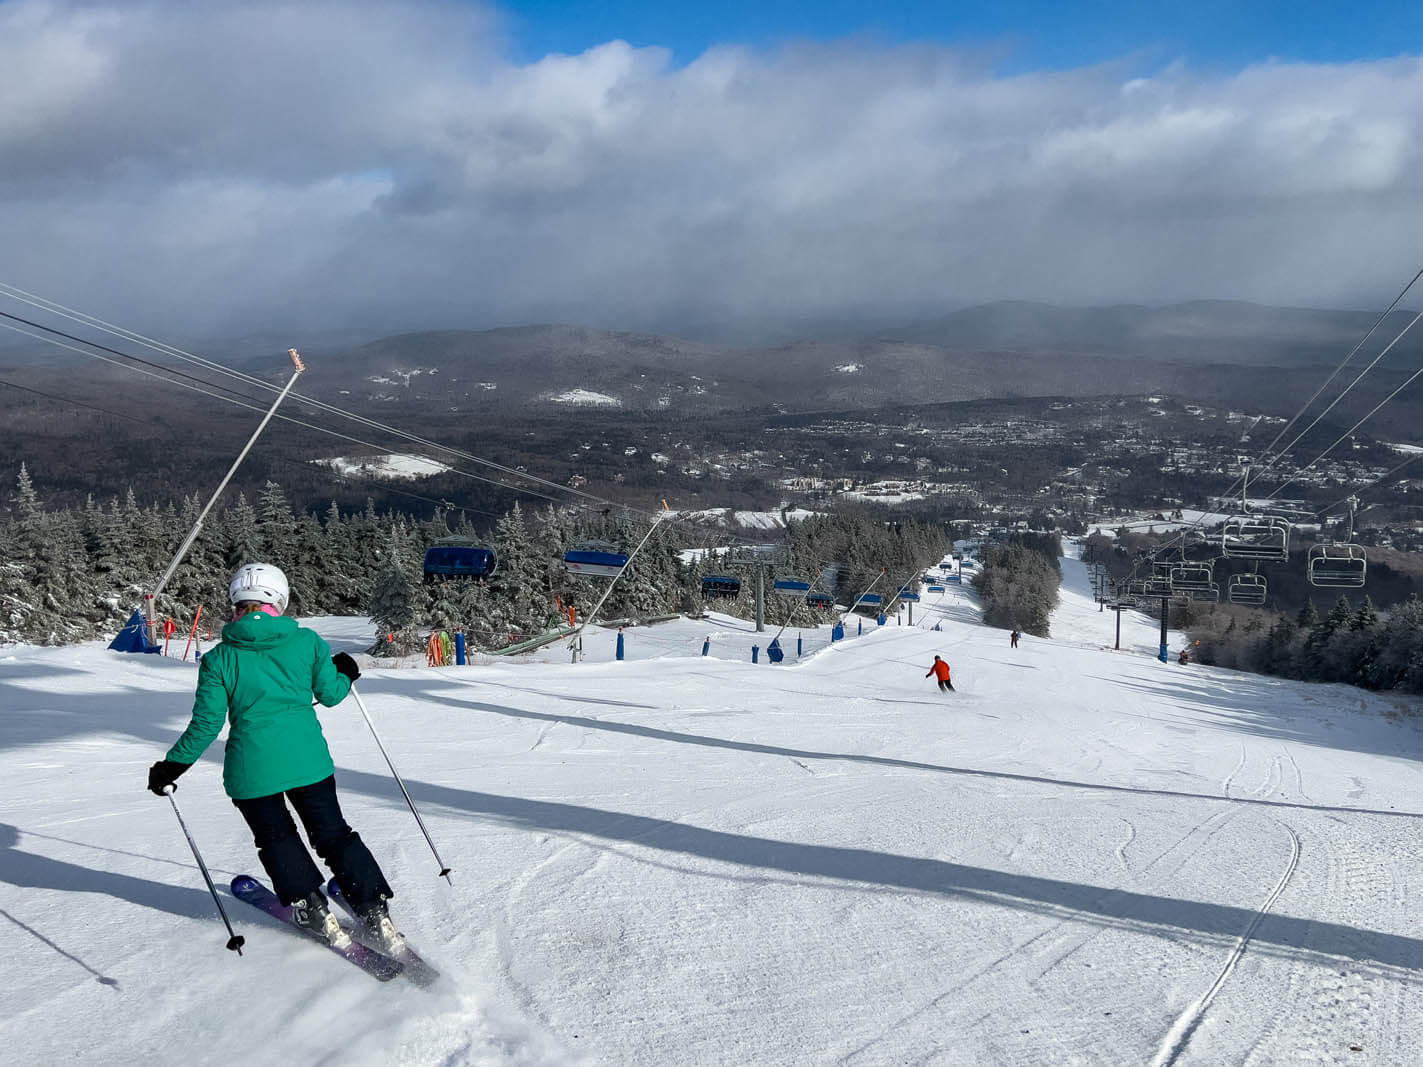 Some of the best skiing near NYC at Mount Snow in Southern Vermont